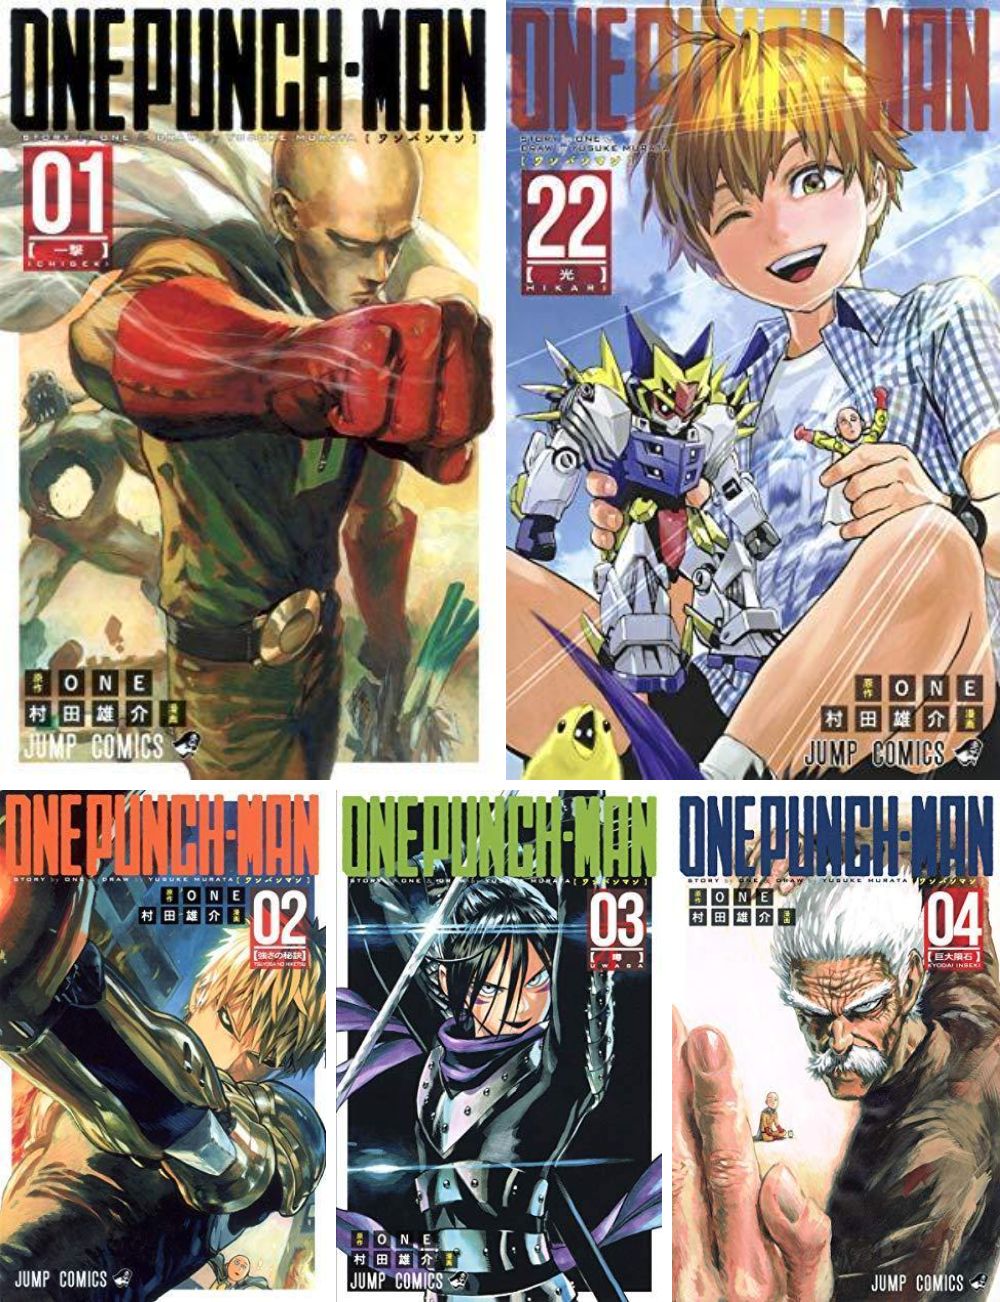 One-Punch Man, Vol. 23, Book by ONE, Yusuke Murata, Official Publisher  Page